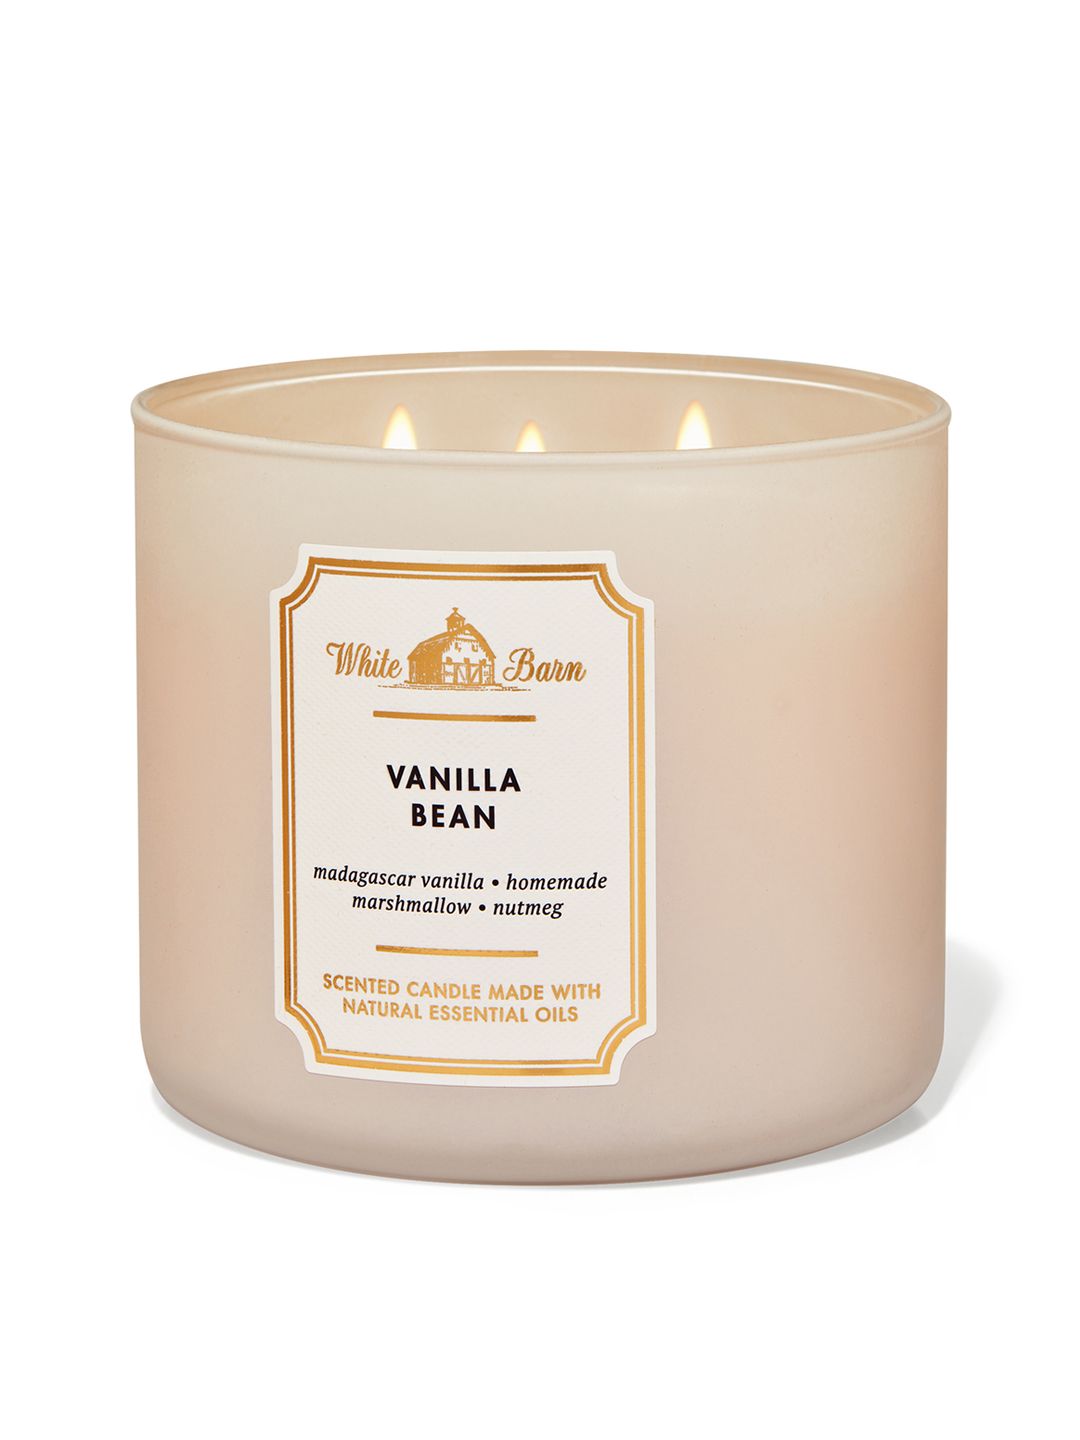 Bath & Body Works Vanilla Bean 3-Wick Scented Candle - 411g Price in India